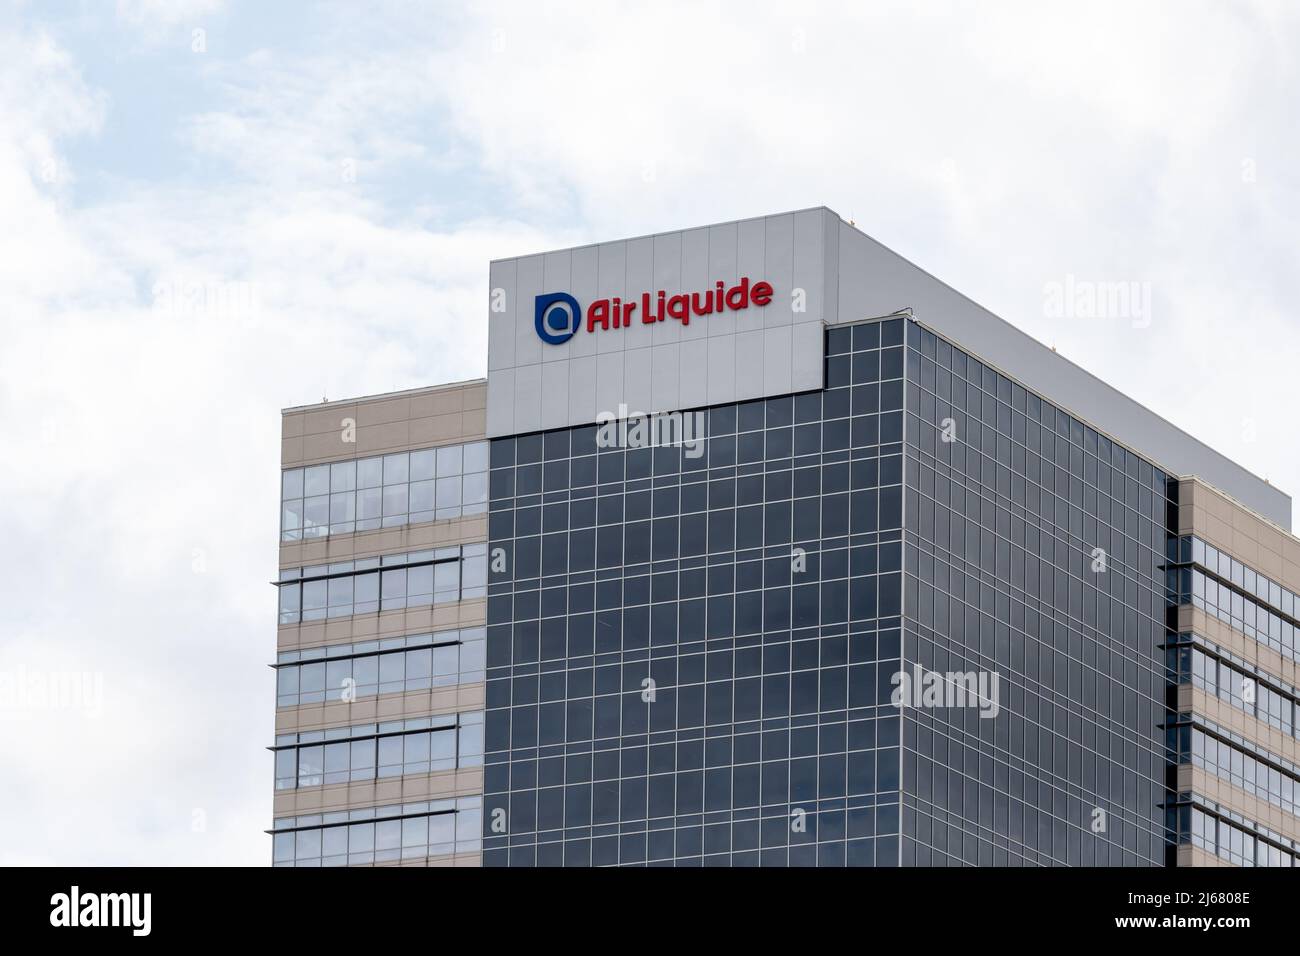 Houston, Texas, USA - March 6, 2022: Air Liquide’s sign on its office building in Houston, Texas, USA. Stock Photo